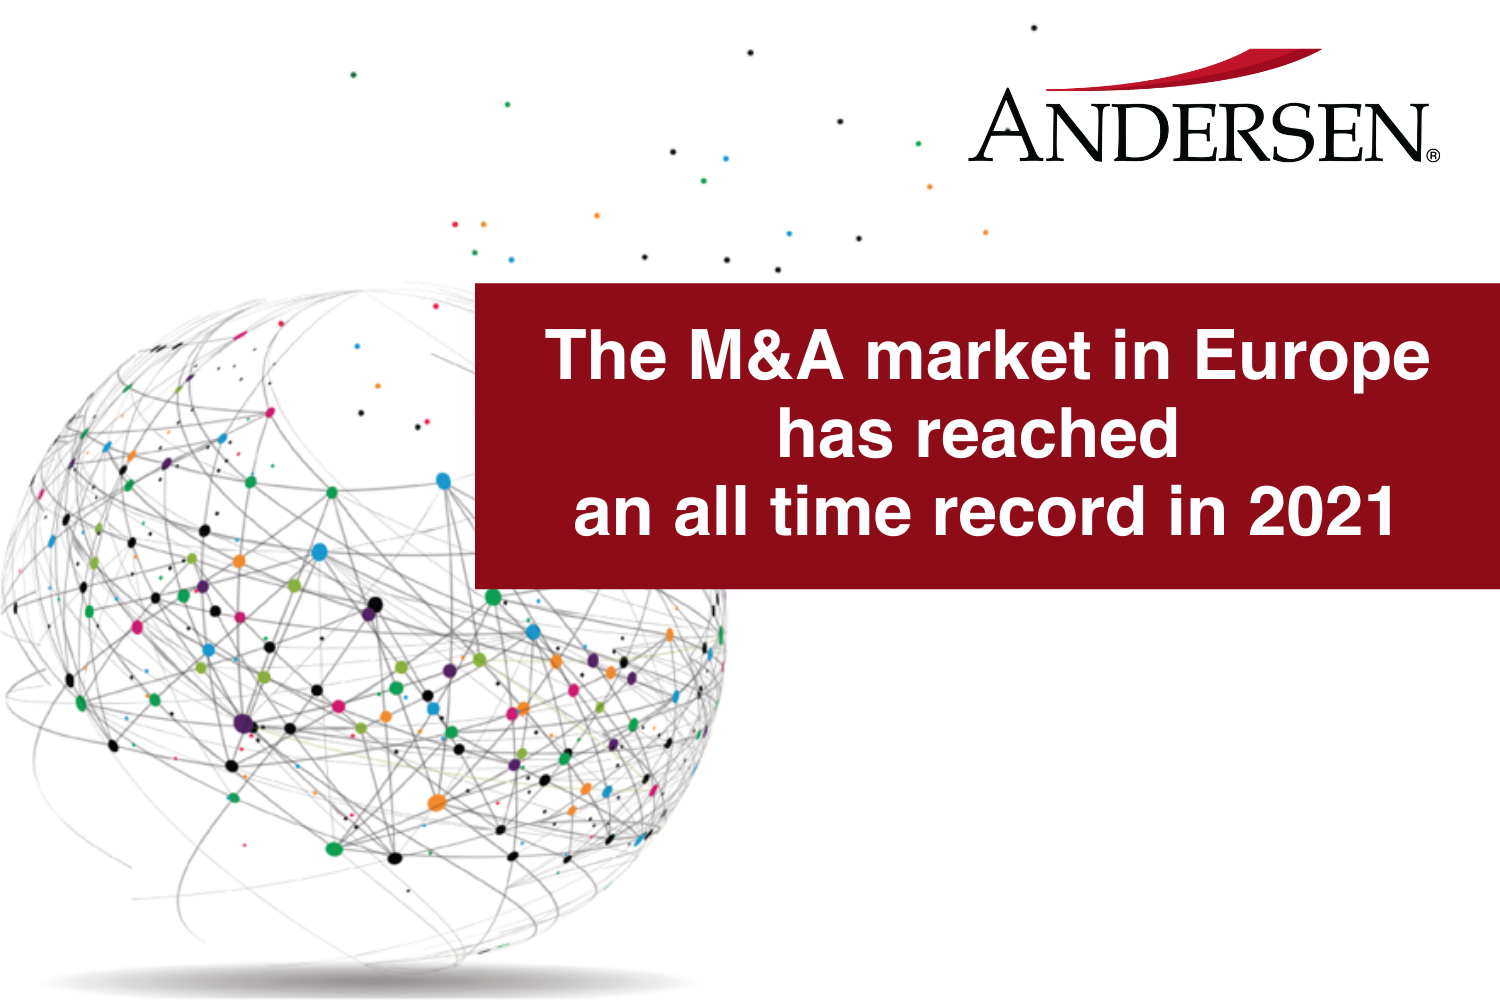 The M&A market in Europe reached an all time record in 2021